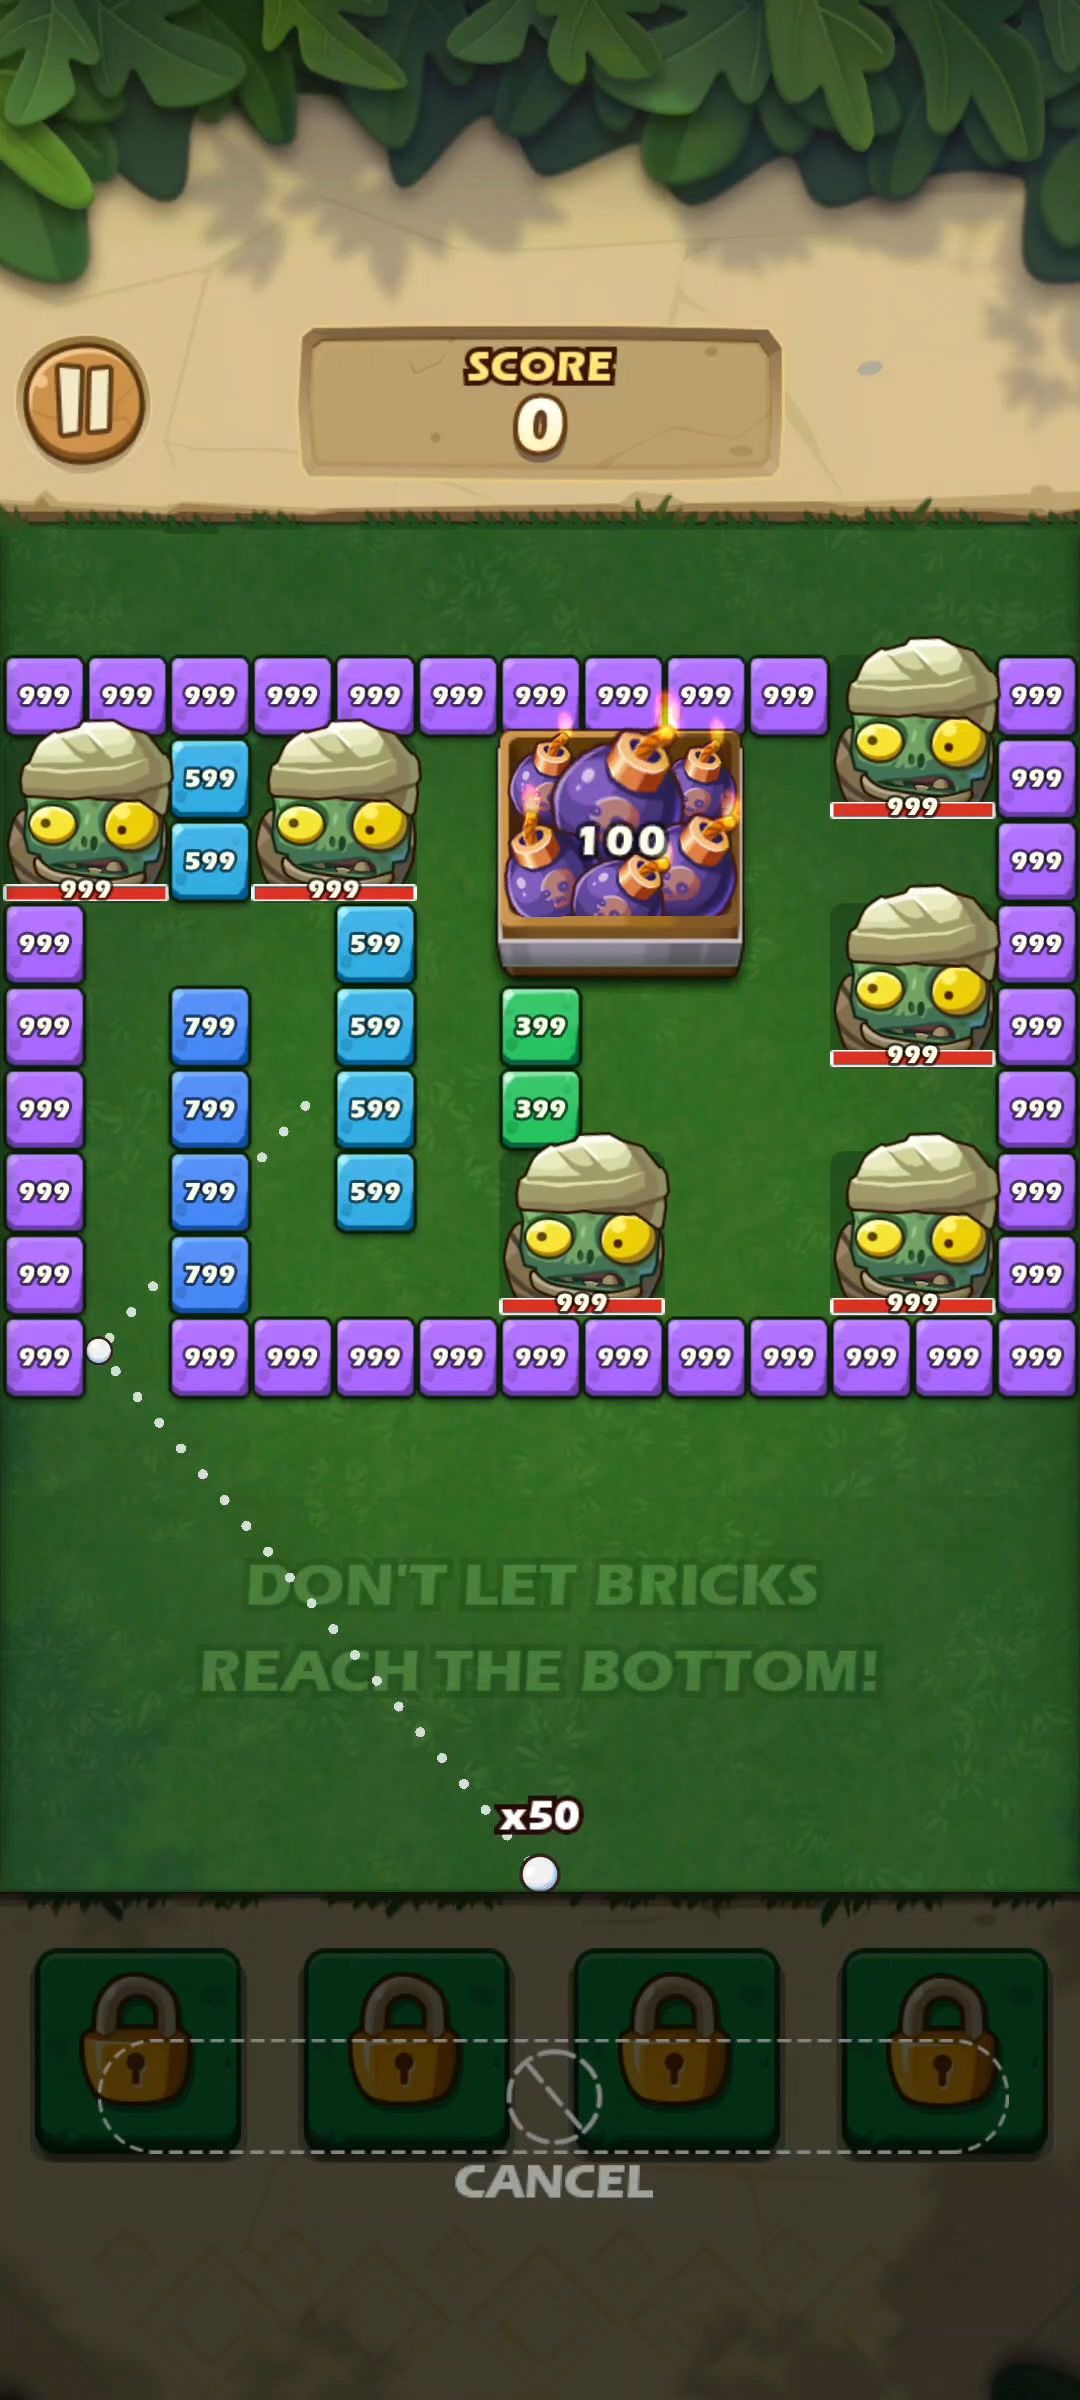 Gameplay of the Breaker Fun 2: Zombie Brick for Android phone or tablet.